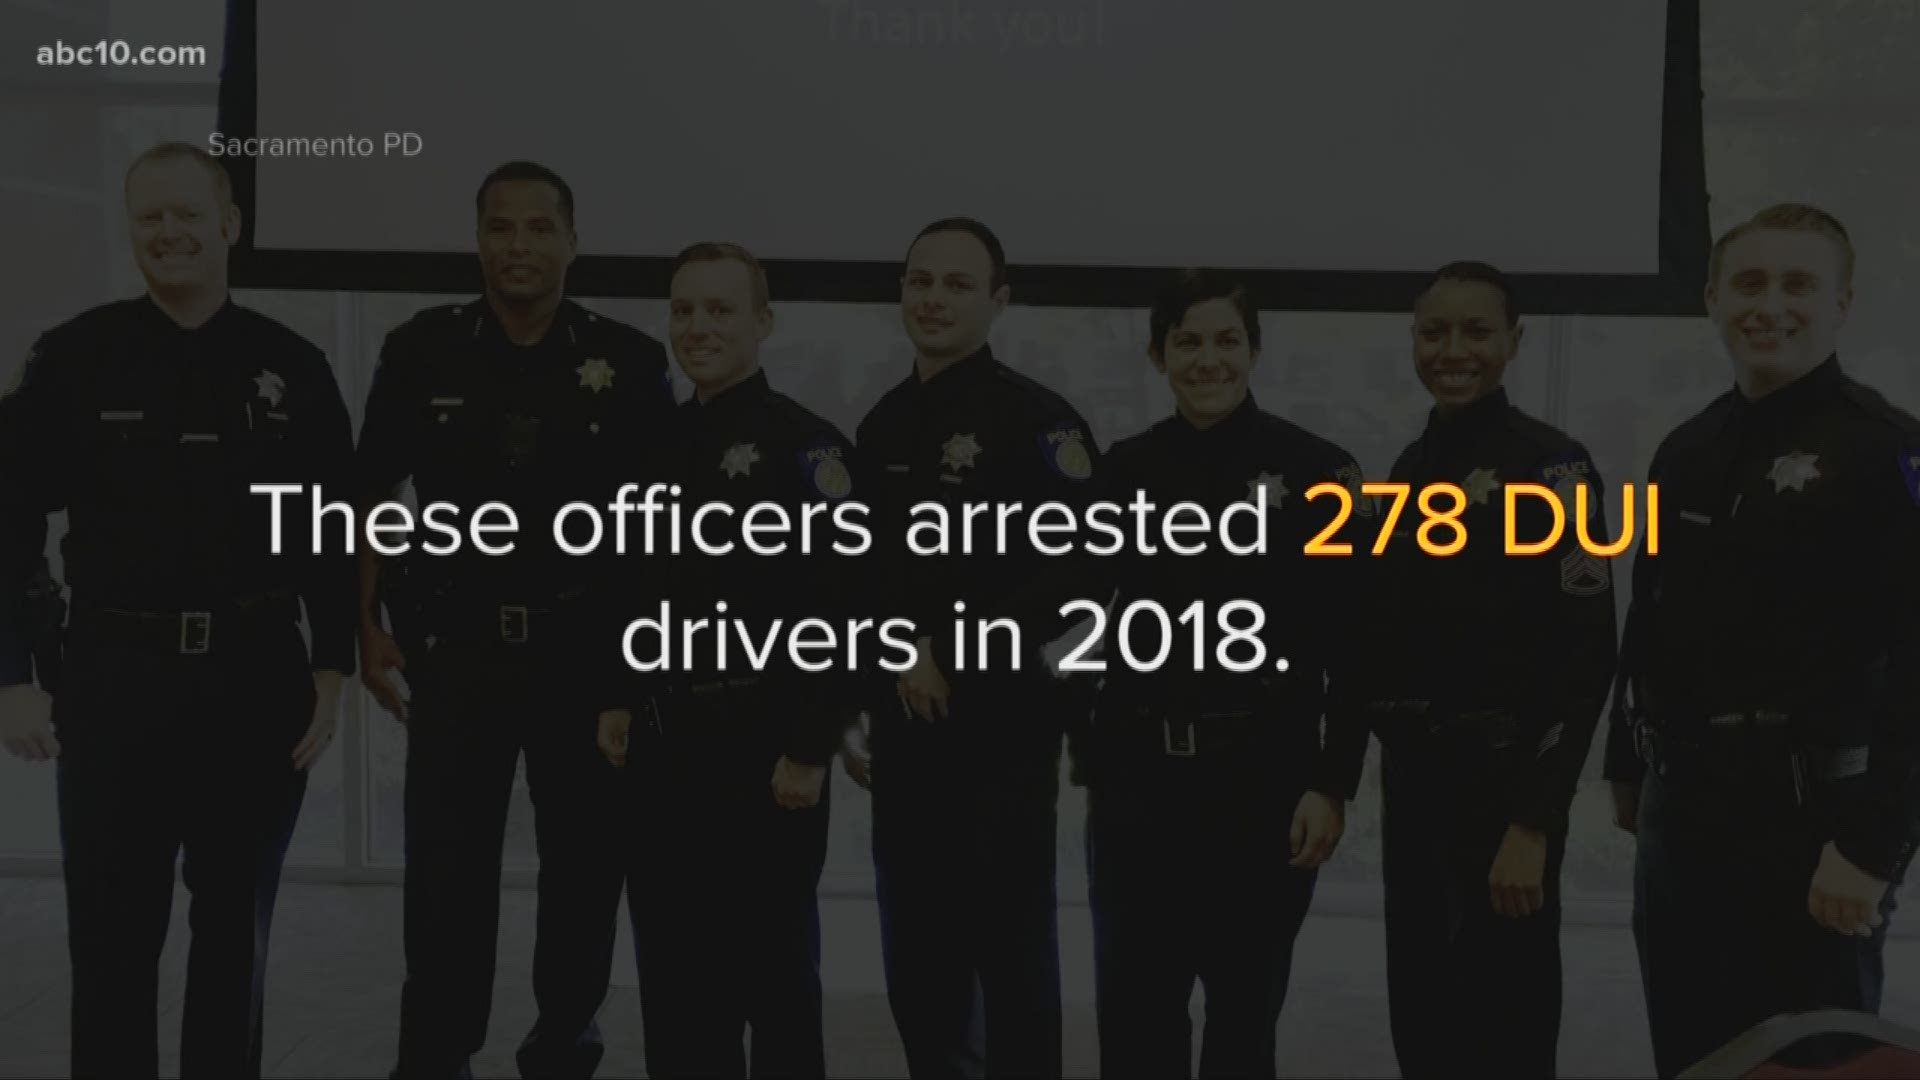 One officer is responsible for making 102 of those arrests.